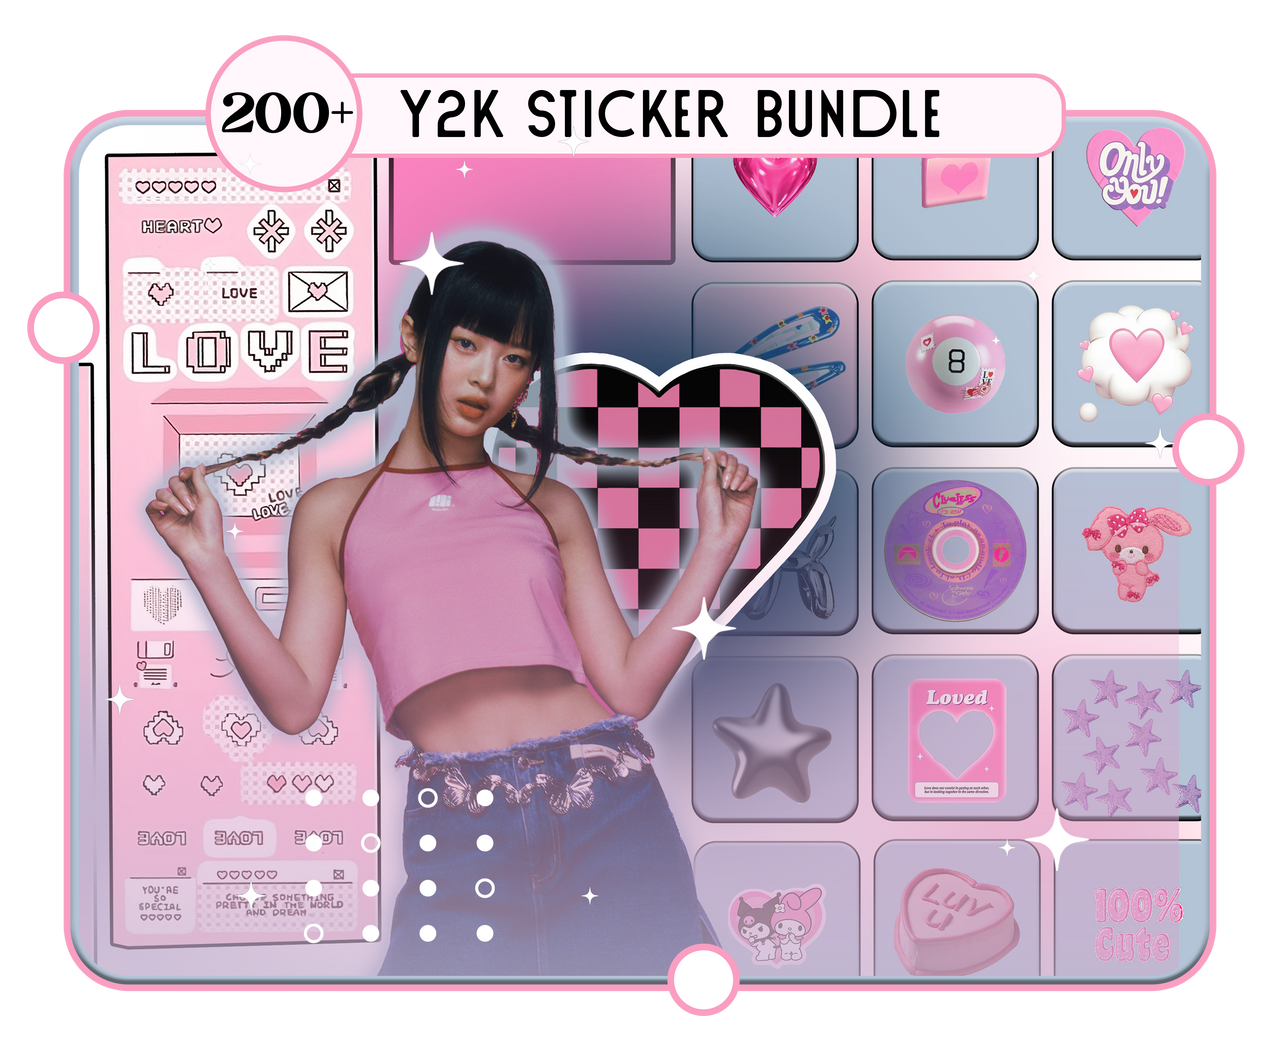 200+ Y2K STICKERS BUNDLE | PNG PACK by chimiyaa on DeviantArt